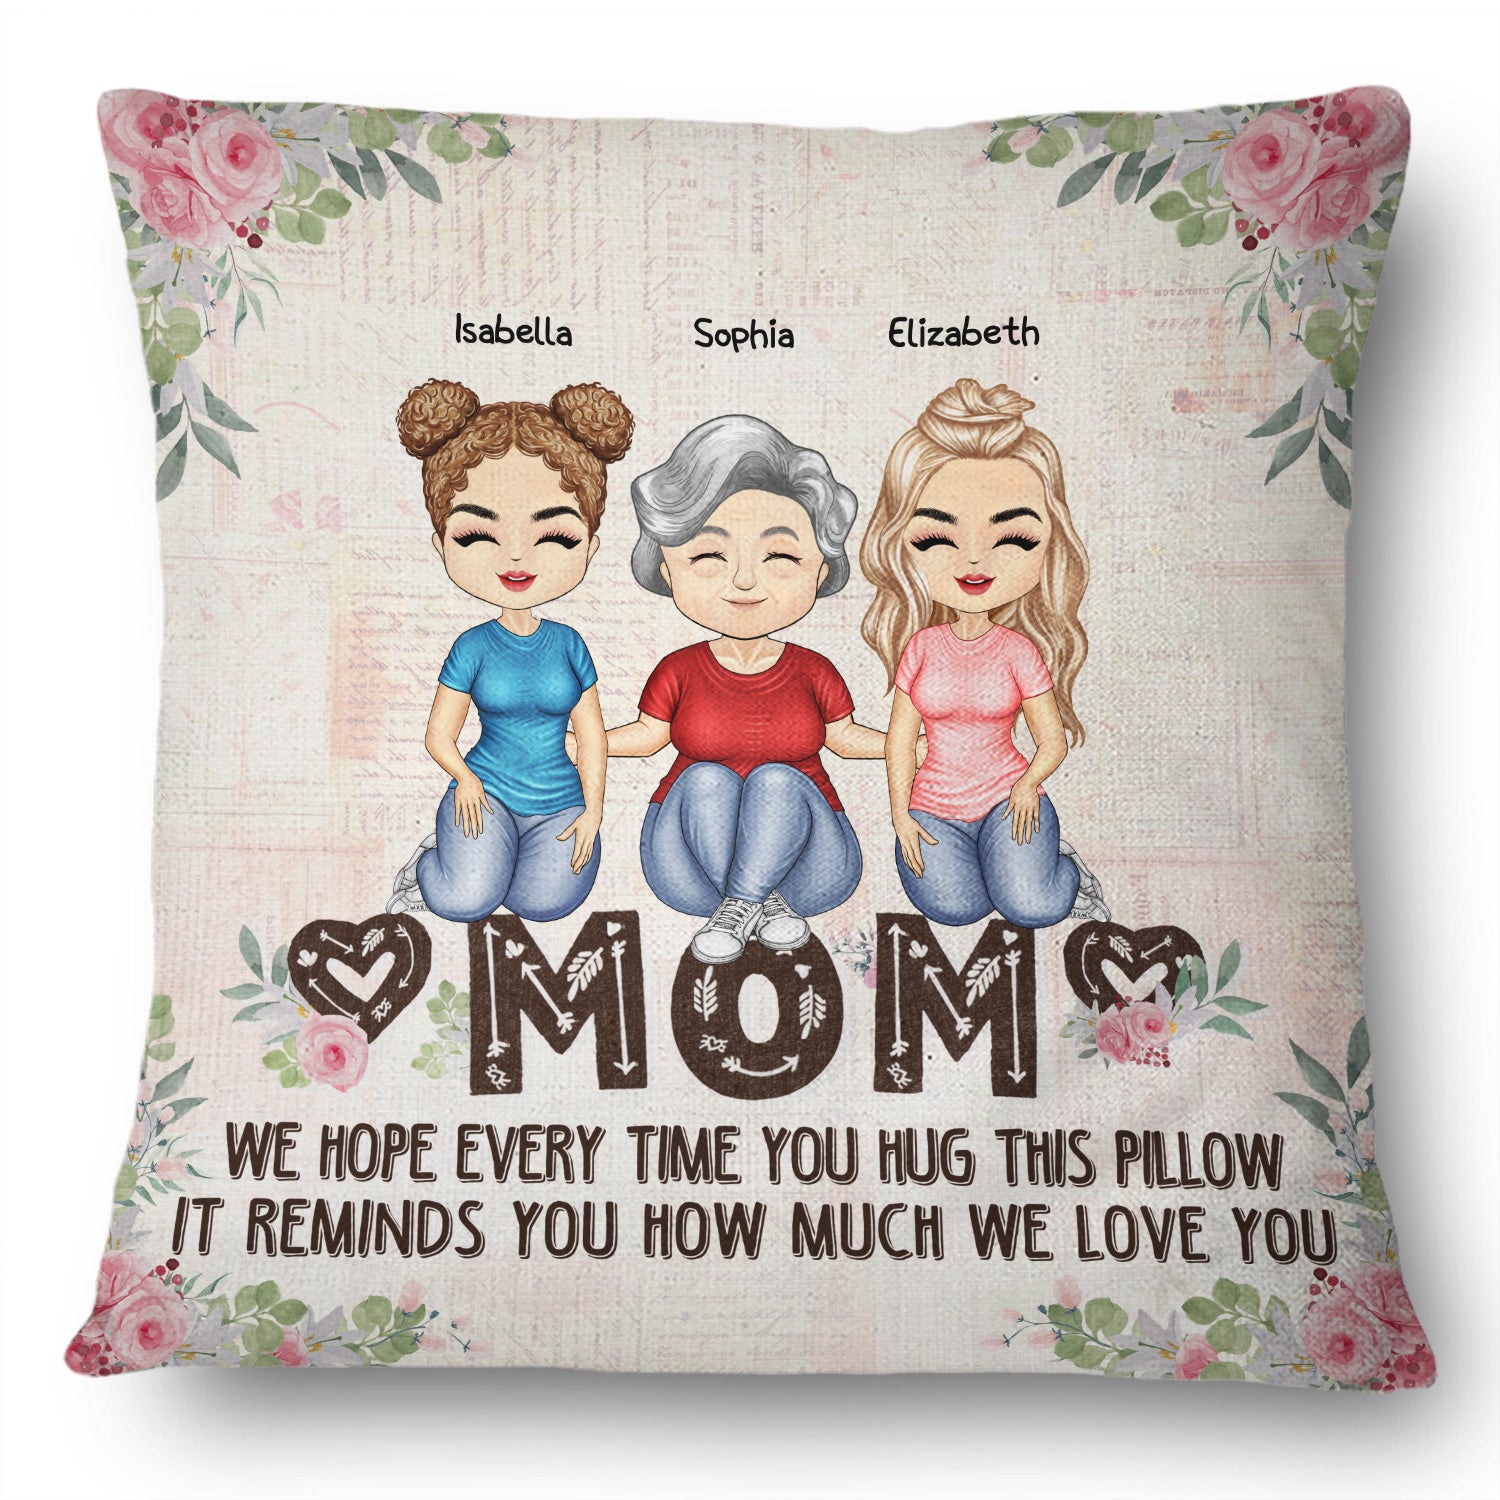 We Hope Every Time You Hug This Pillow - Birthday, Loving Gift For Mom, Mother, Grandma, Grandmother - Personalized Custom Pillow